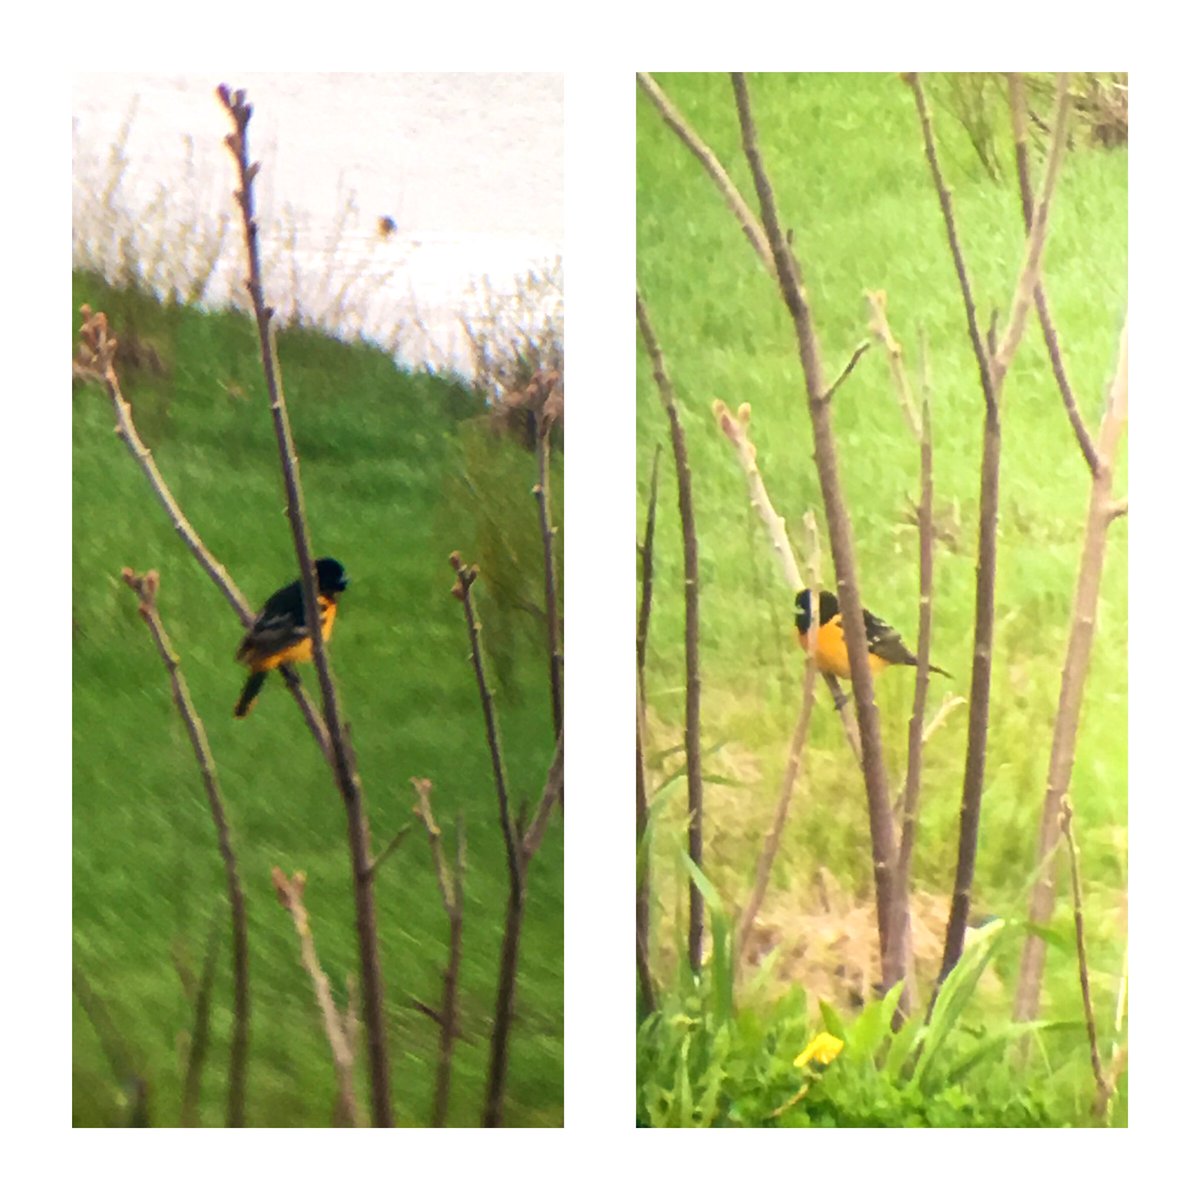 Add to the weekend list: a Baltimore oriole.